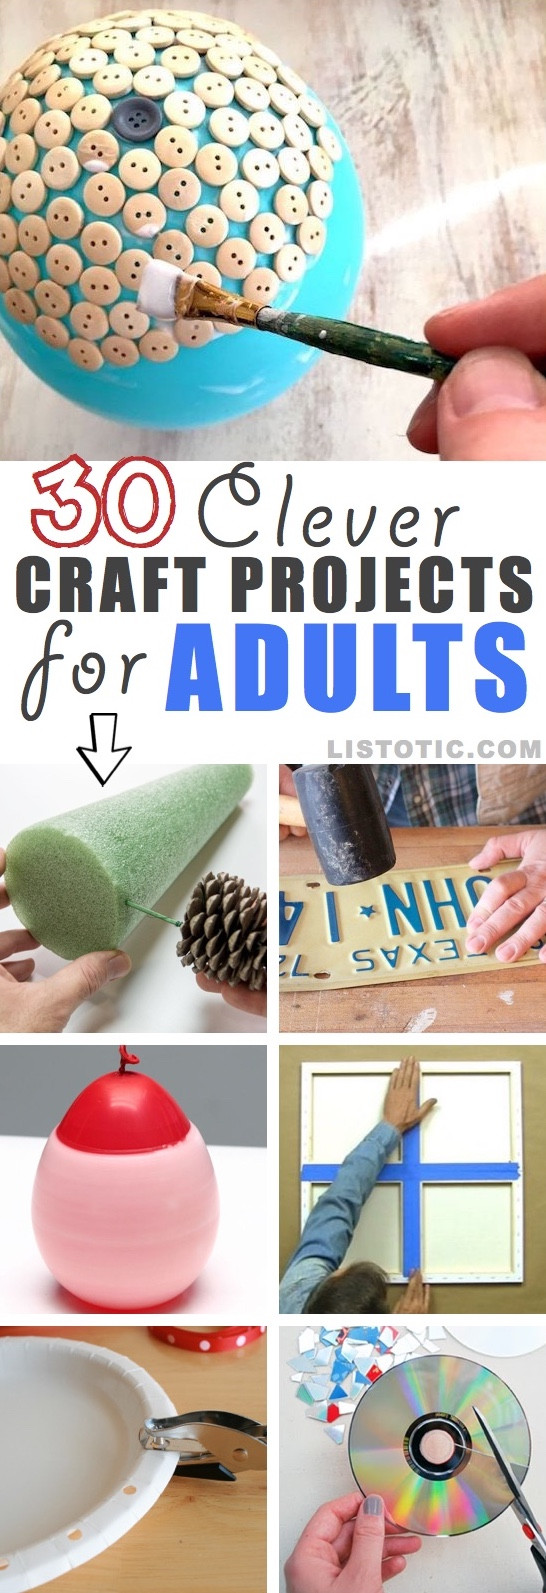 Crafting Ideas For Adults
 Easy DIY Craft Ideas That Will Spark Your Creativity for